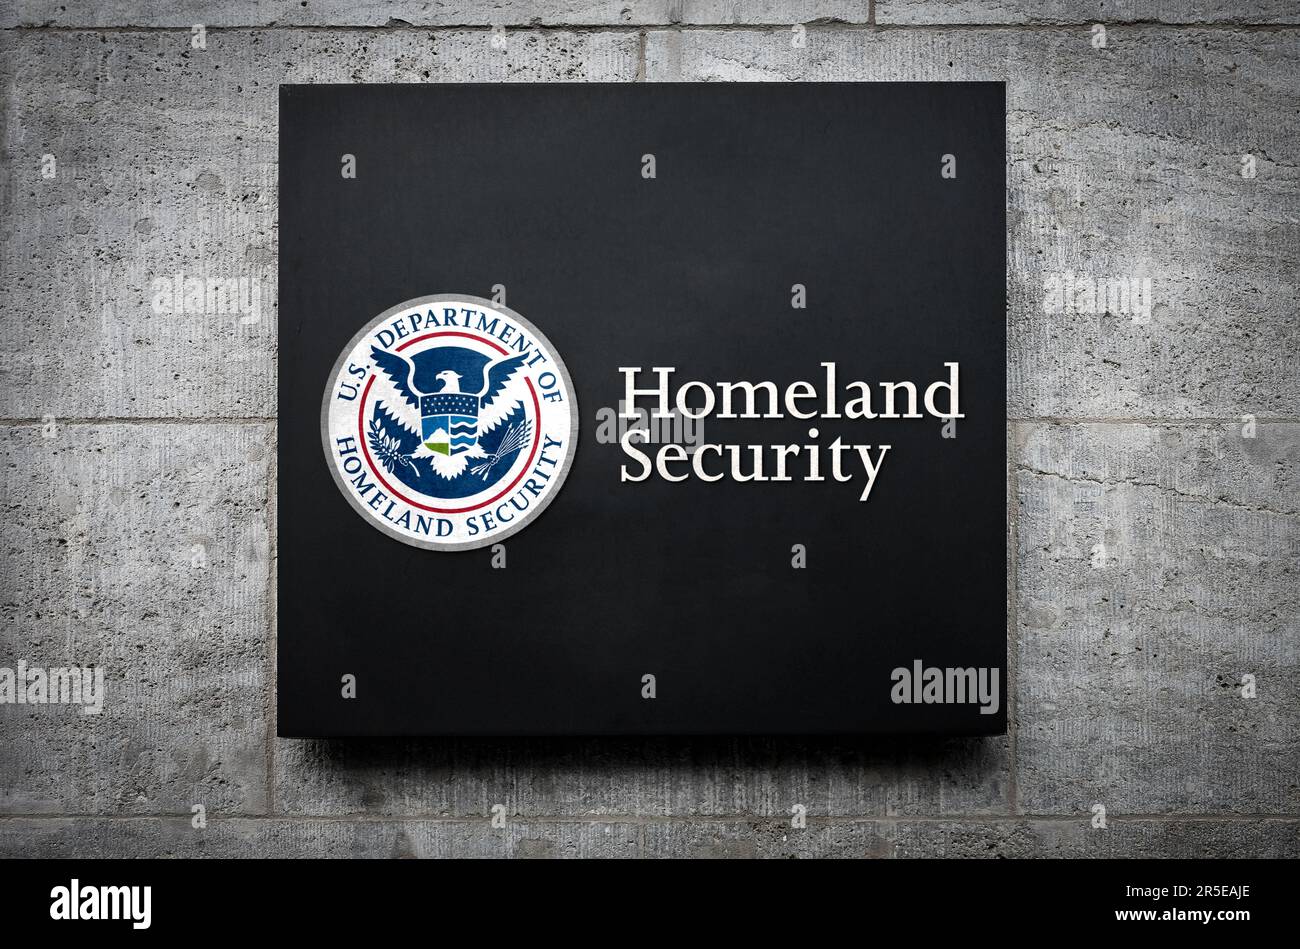 DHS - Department of Homeland Security Stockfoto